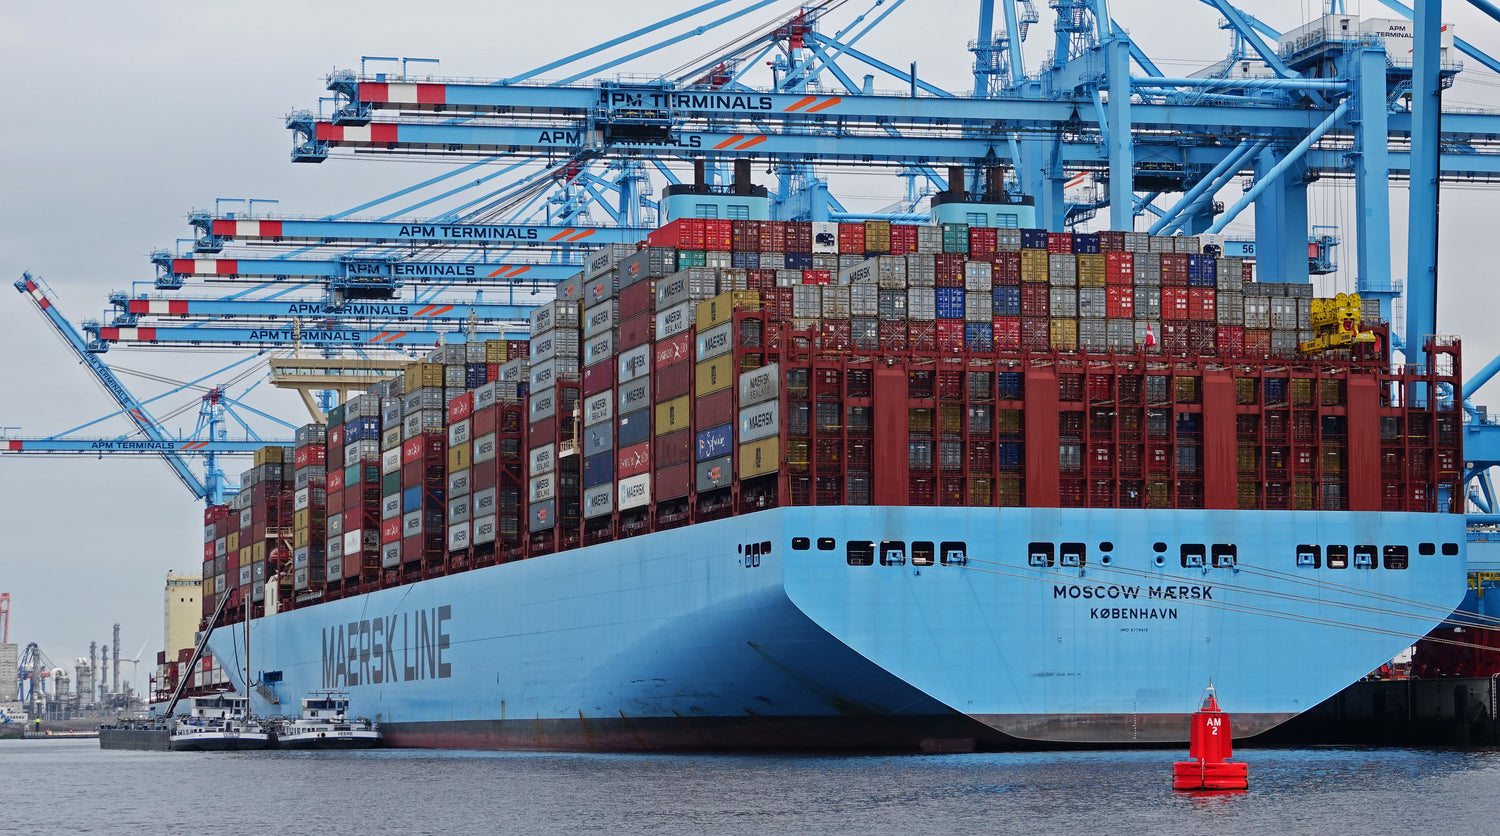 Maersk to revolutionize Internet connectivity for its fleet of 330 container vessels with SpaceX's Starlink